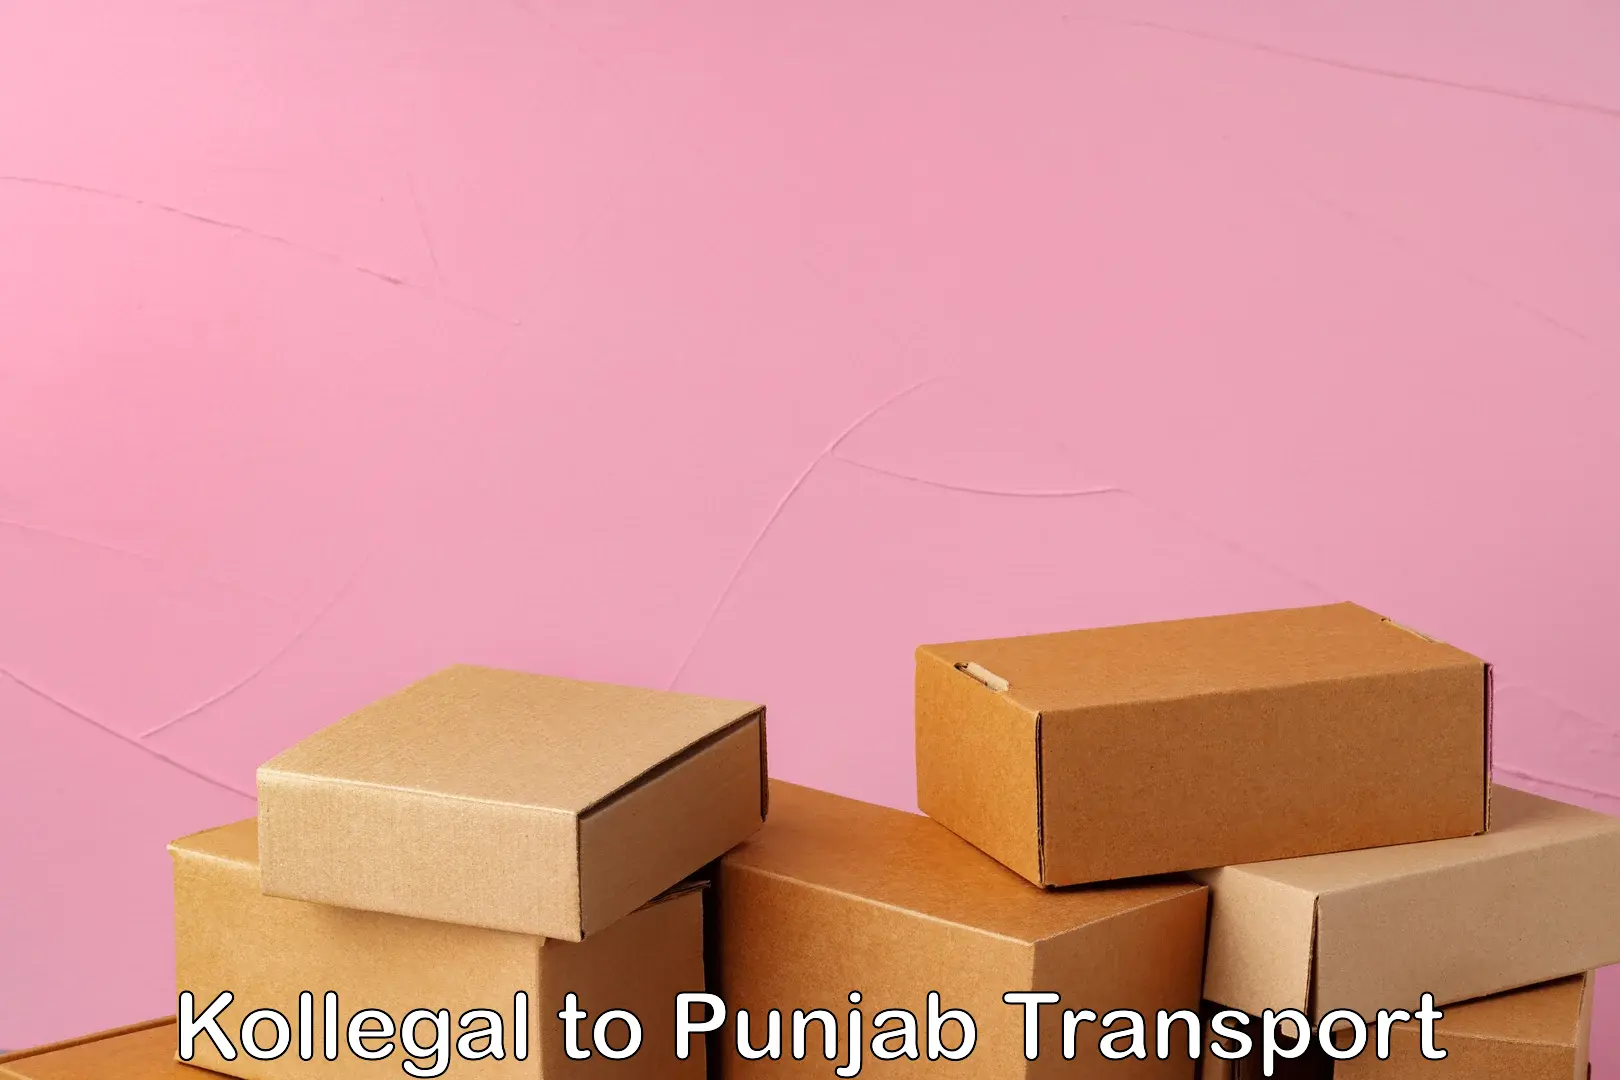 Goods delivery service Kollegal to Punjab